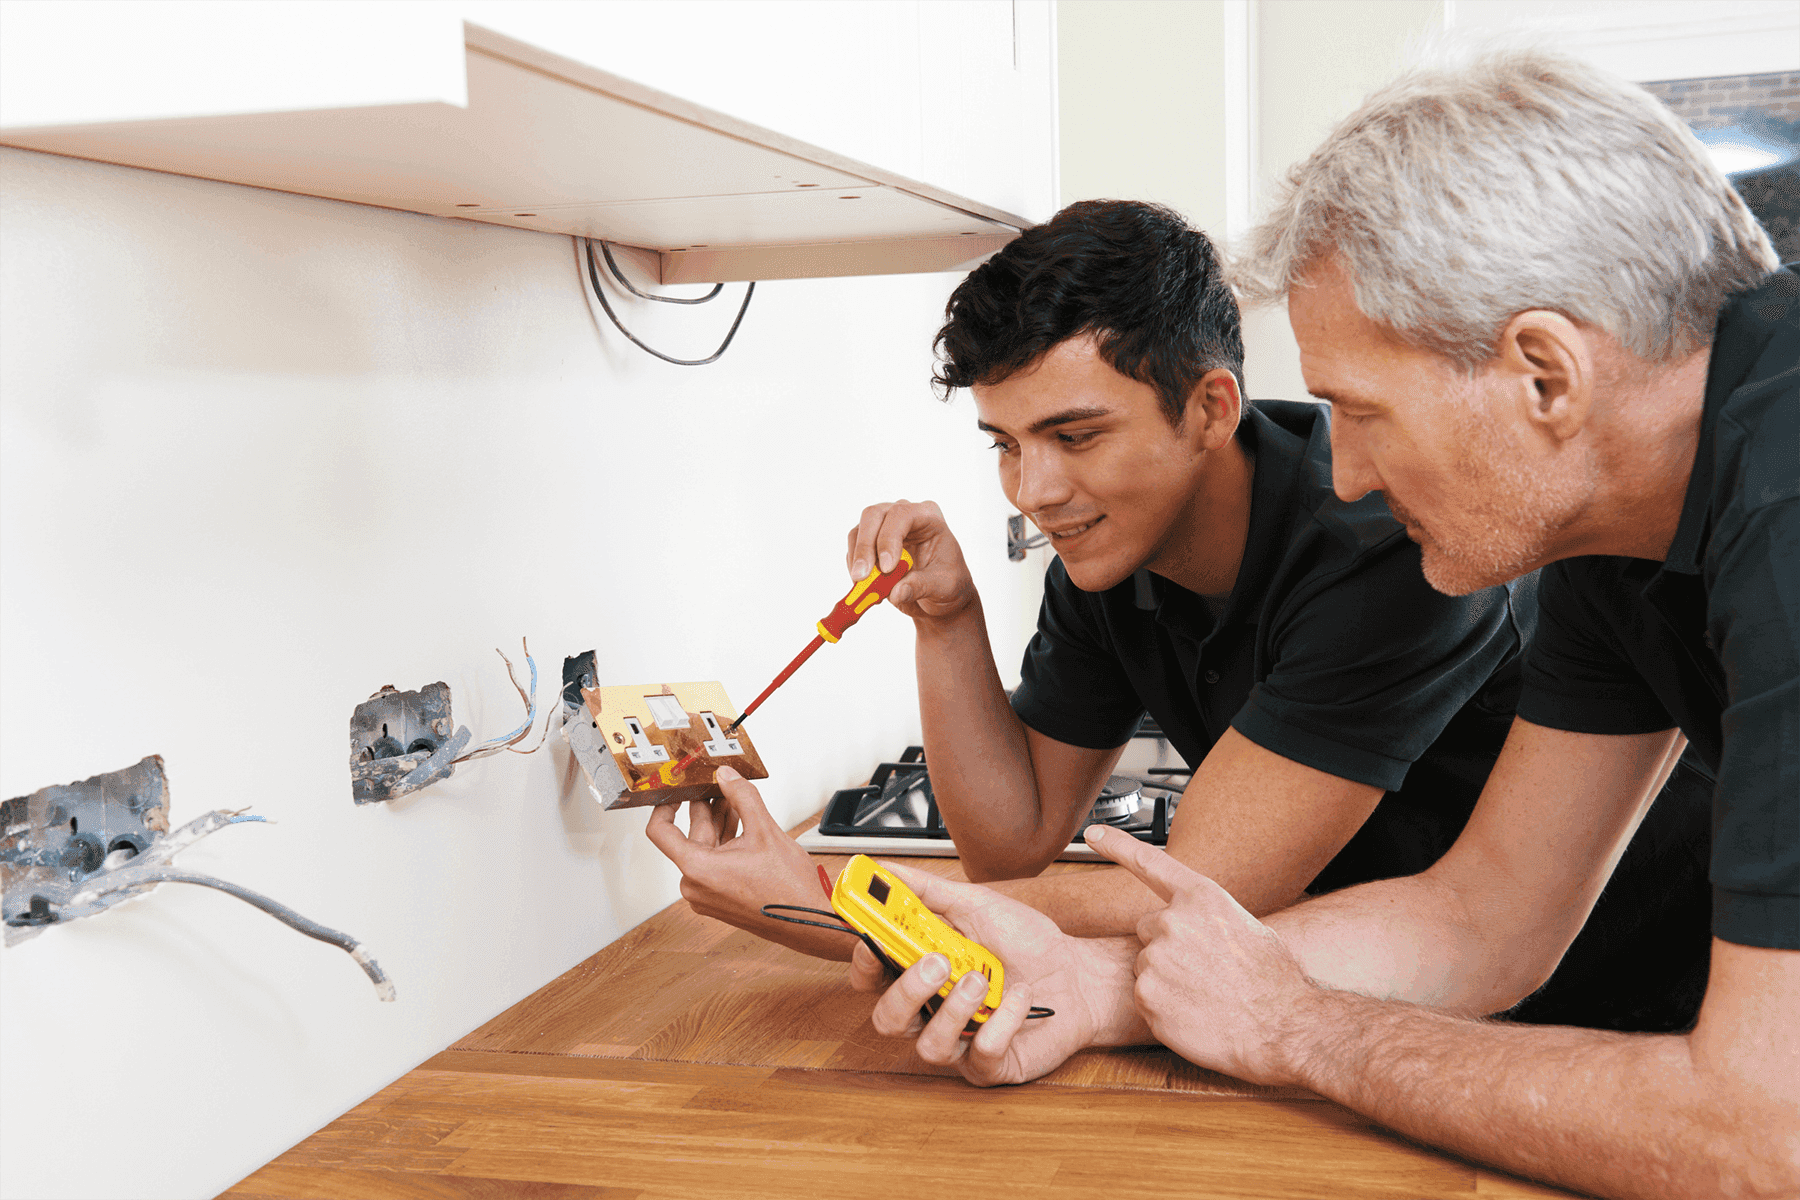 Electricians at work - master and apprentice